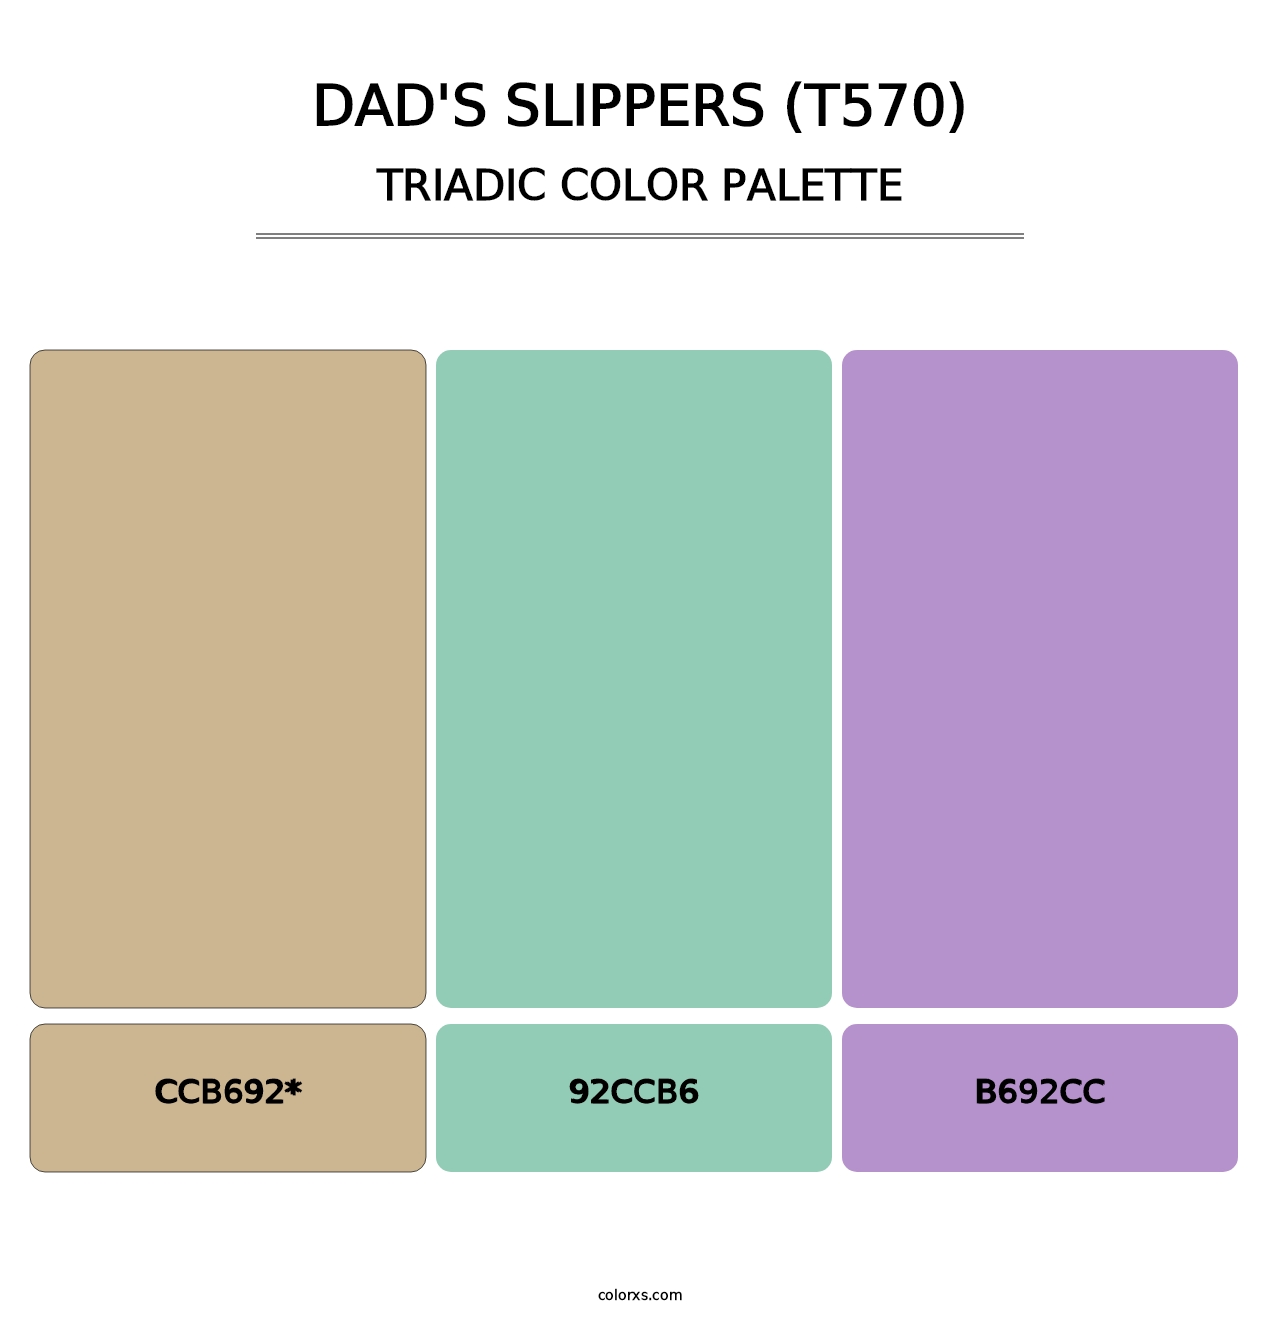 Dad's Slippers (T570) - Triadic Color Palette